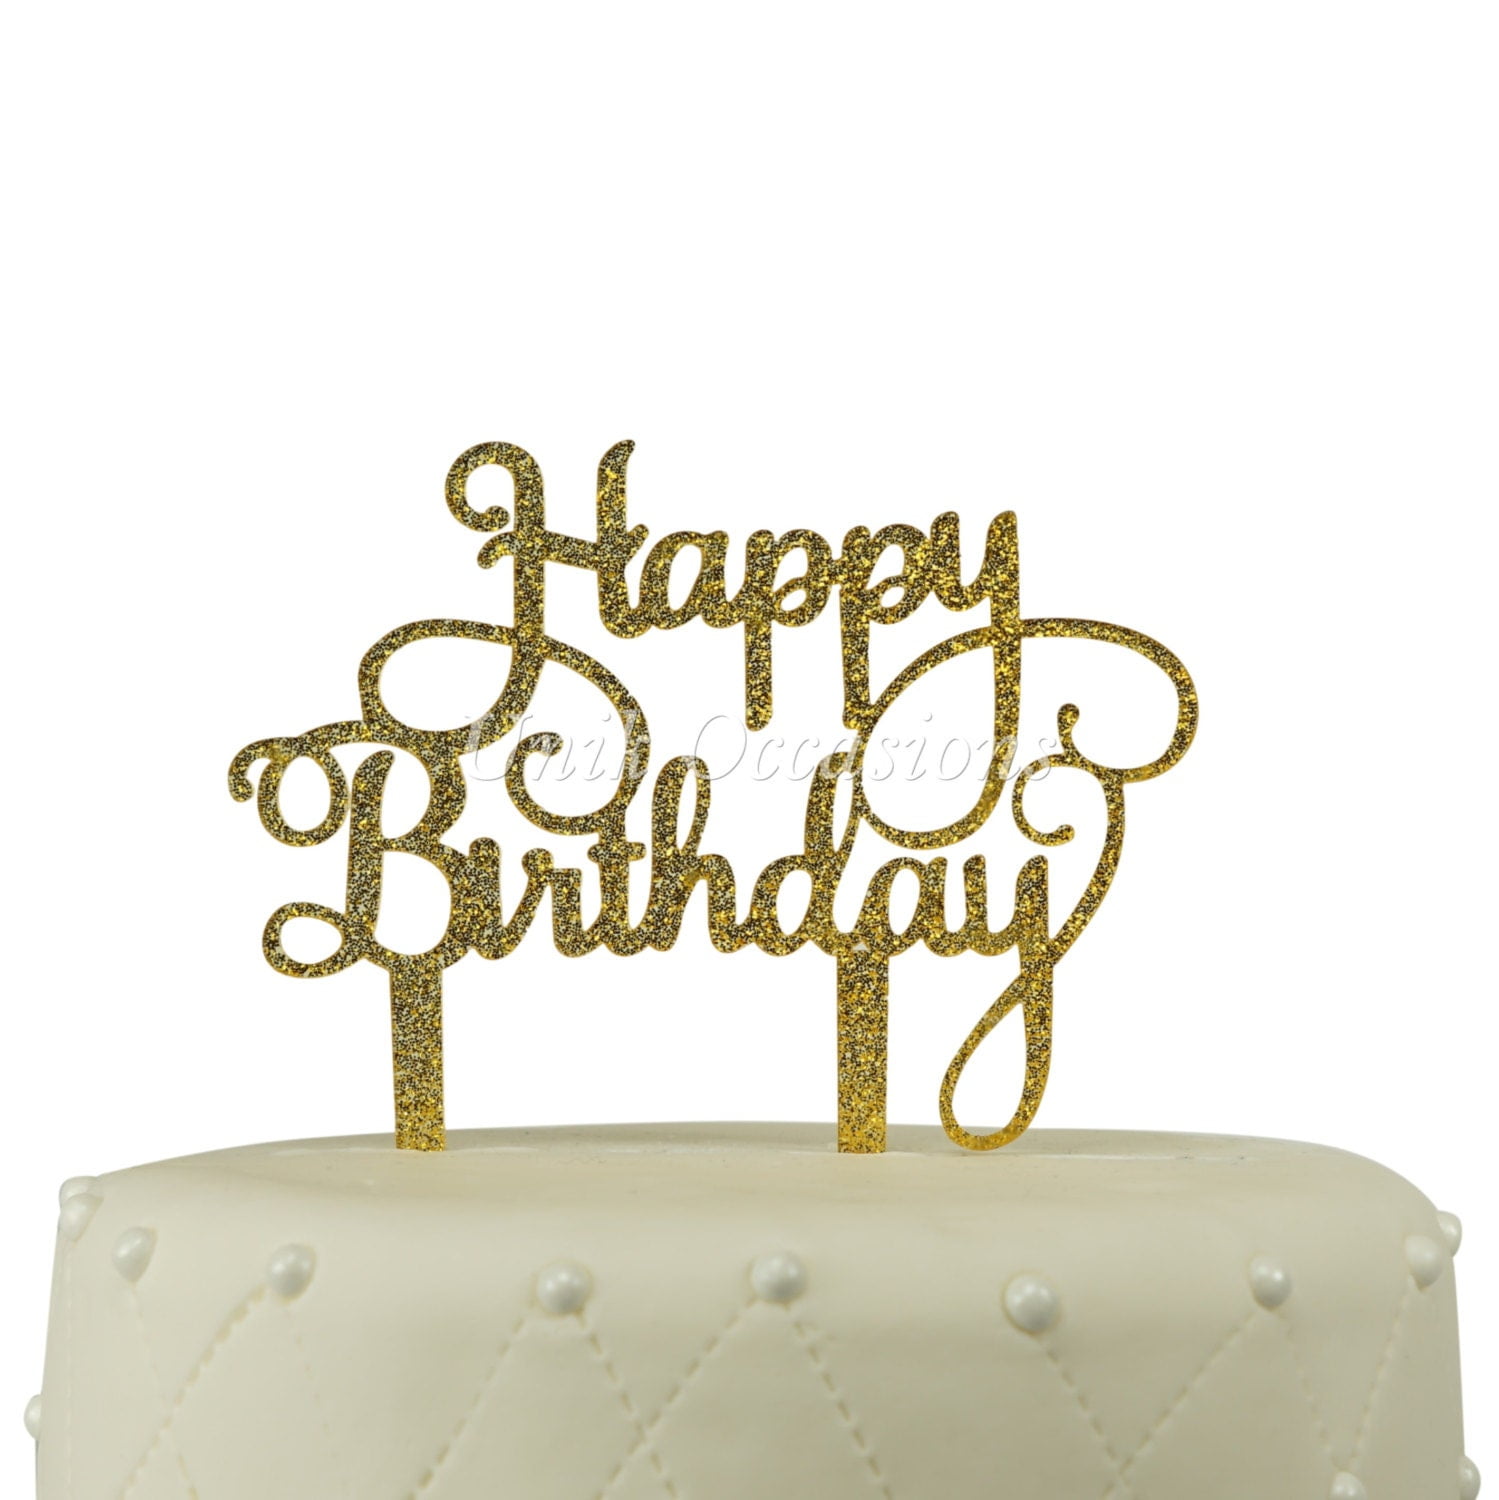 BakeMaestro Happy Birthday Cake Toppers - Gold Acrylic Cake Topper - 4  Different Shapes for Birthdays Event Decorations